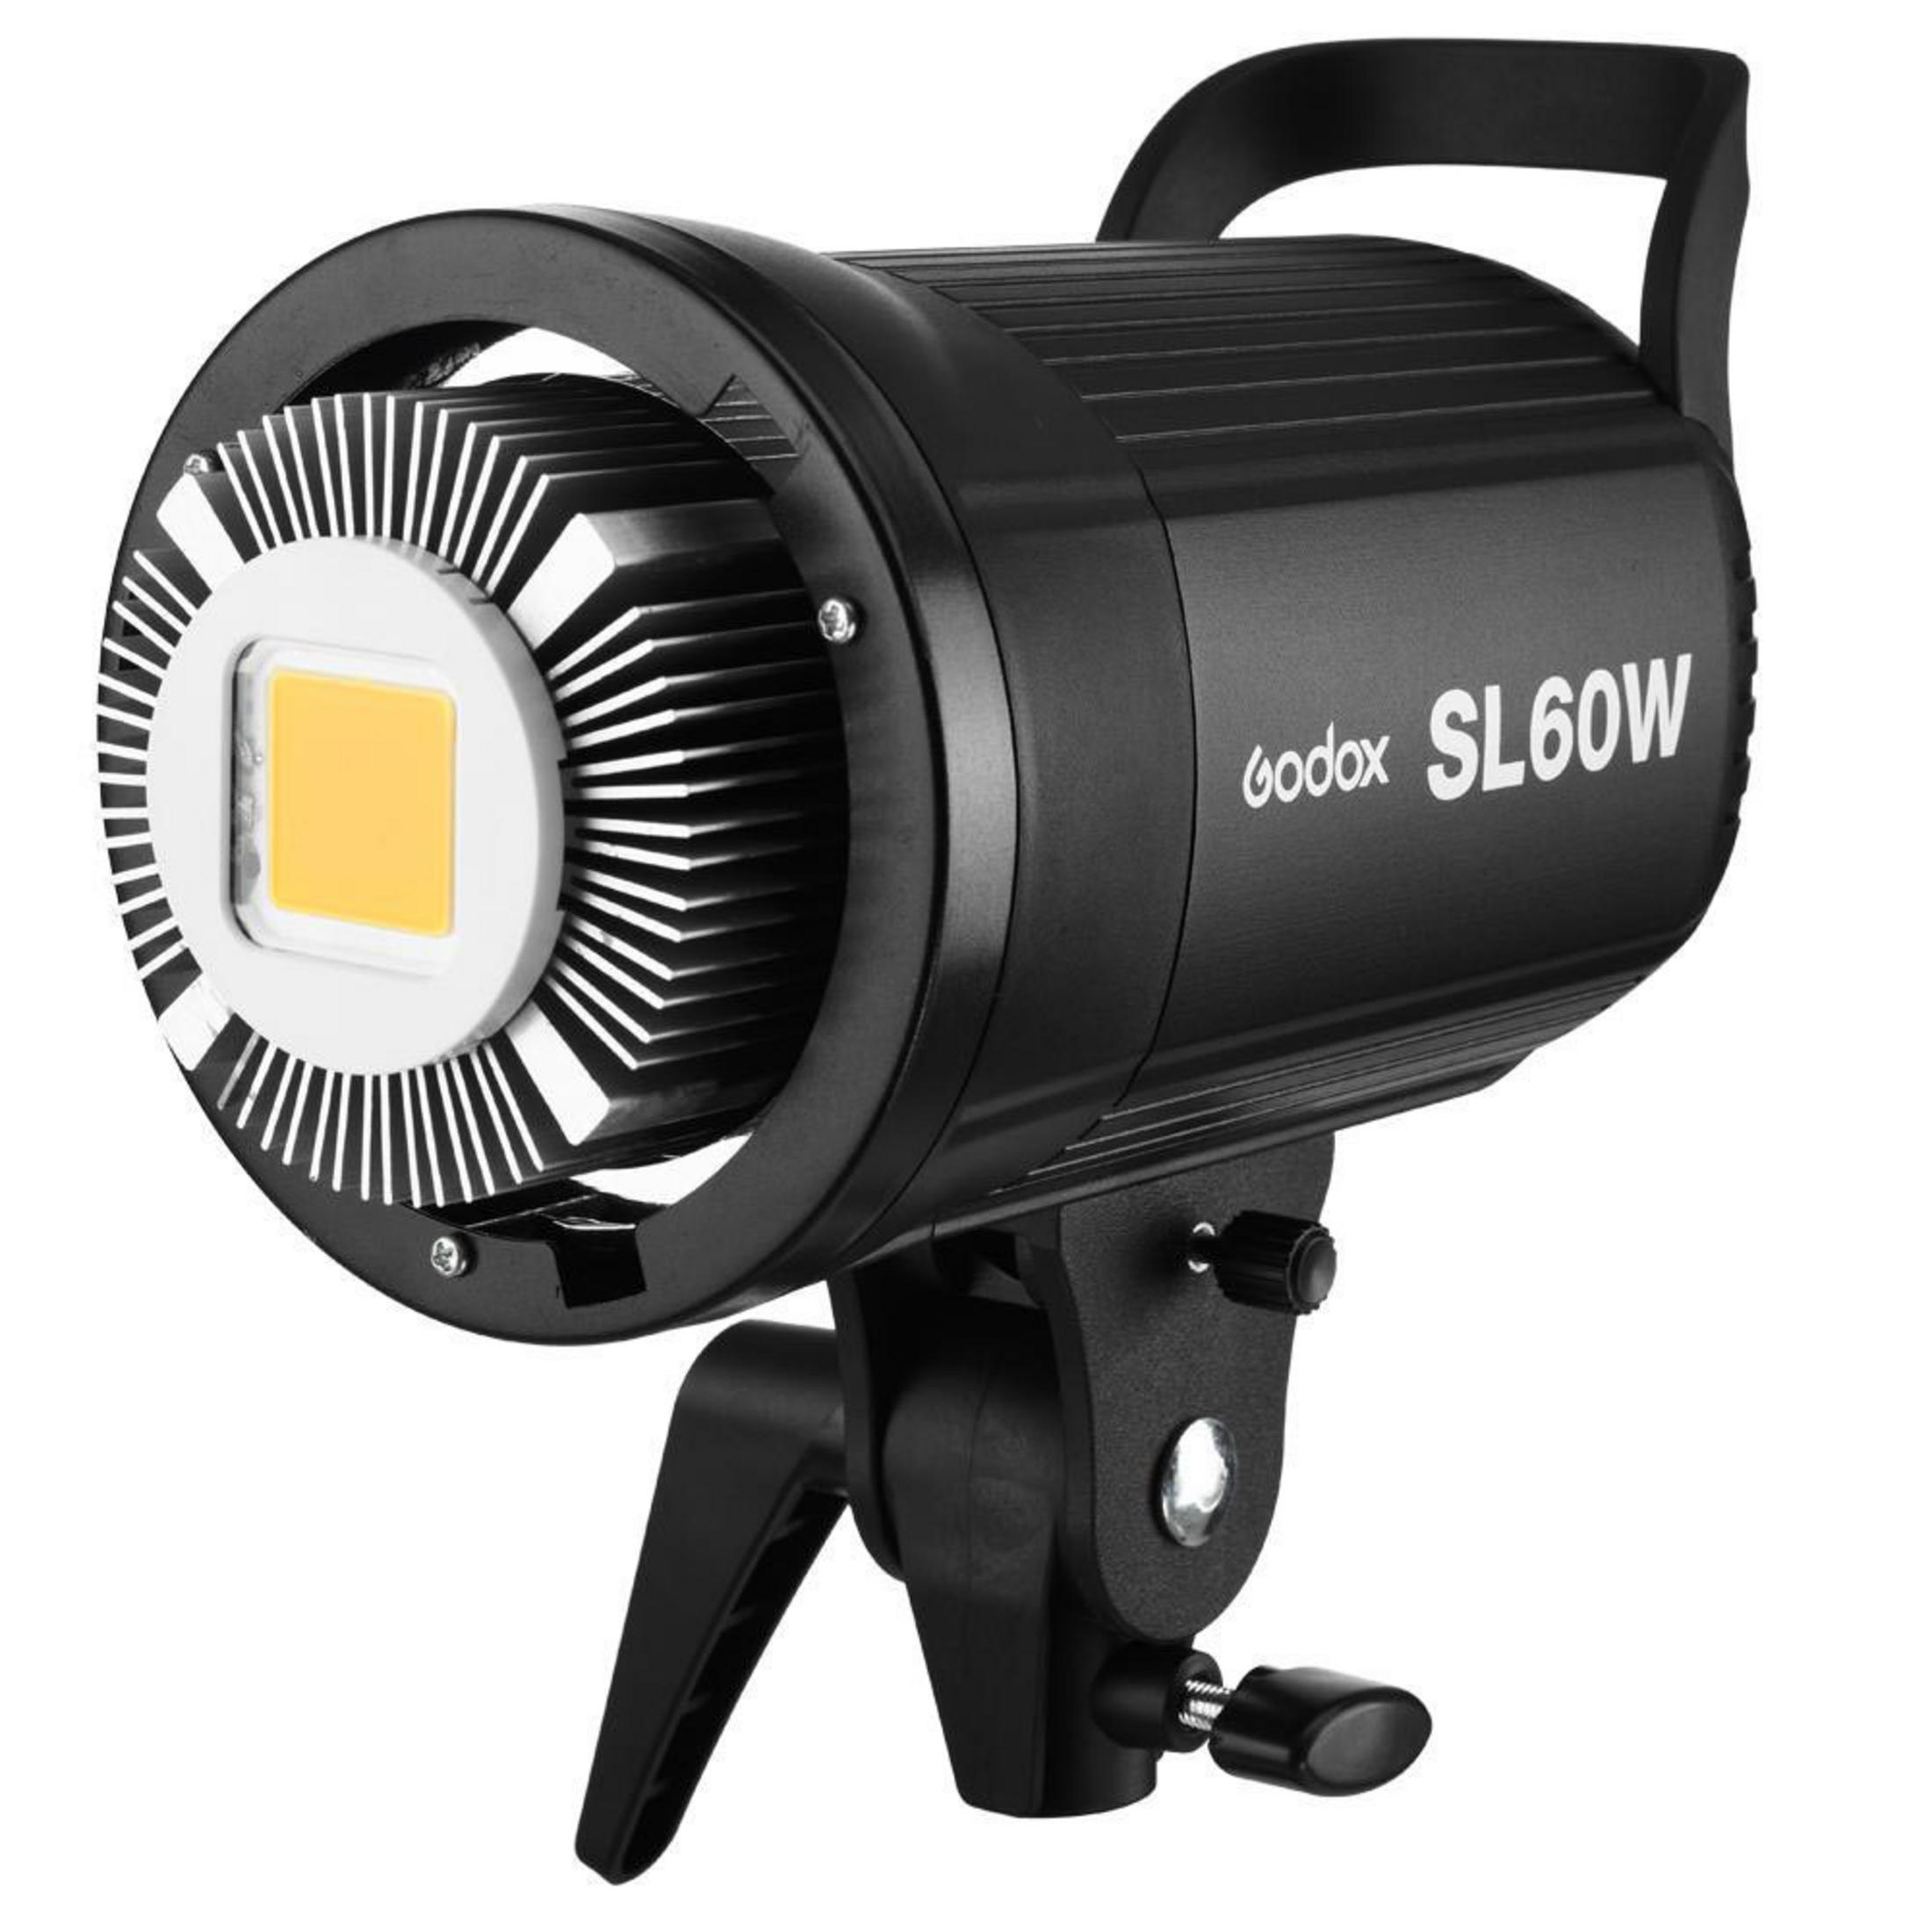 GODOX LED Video Light with Remote Studioleuchte (manuell) Control